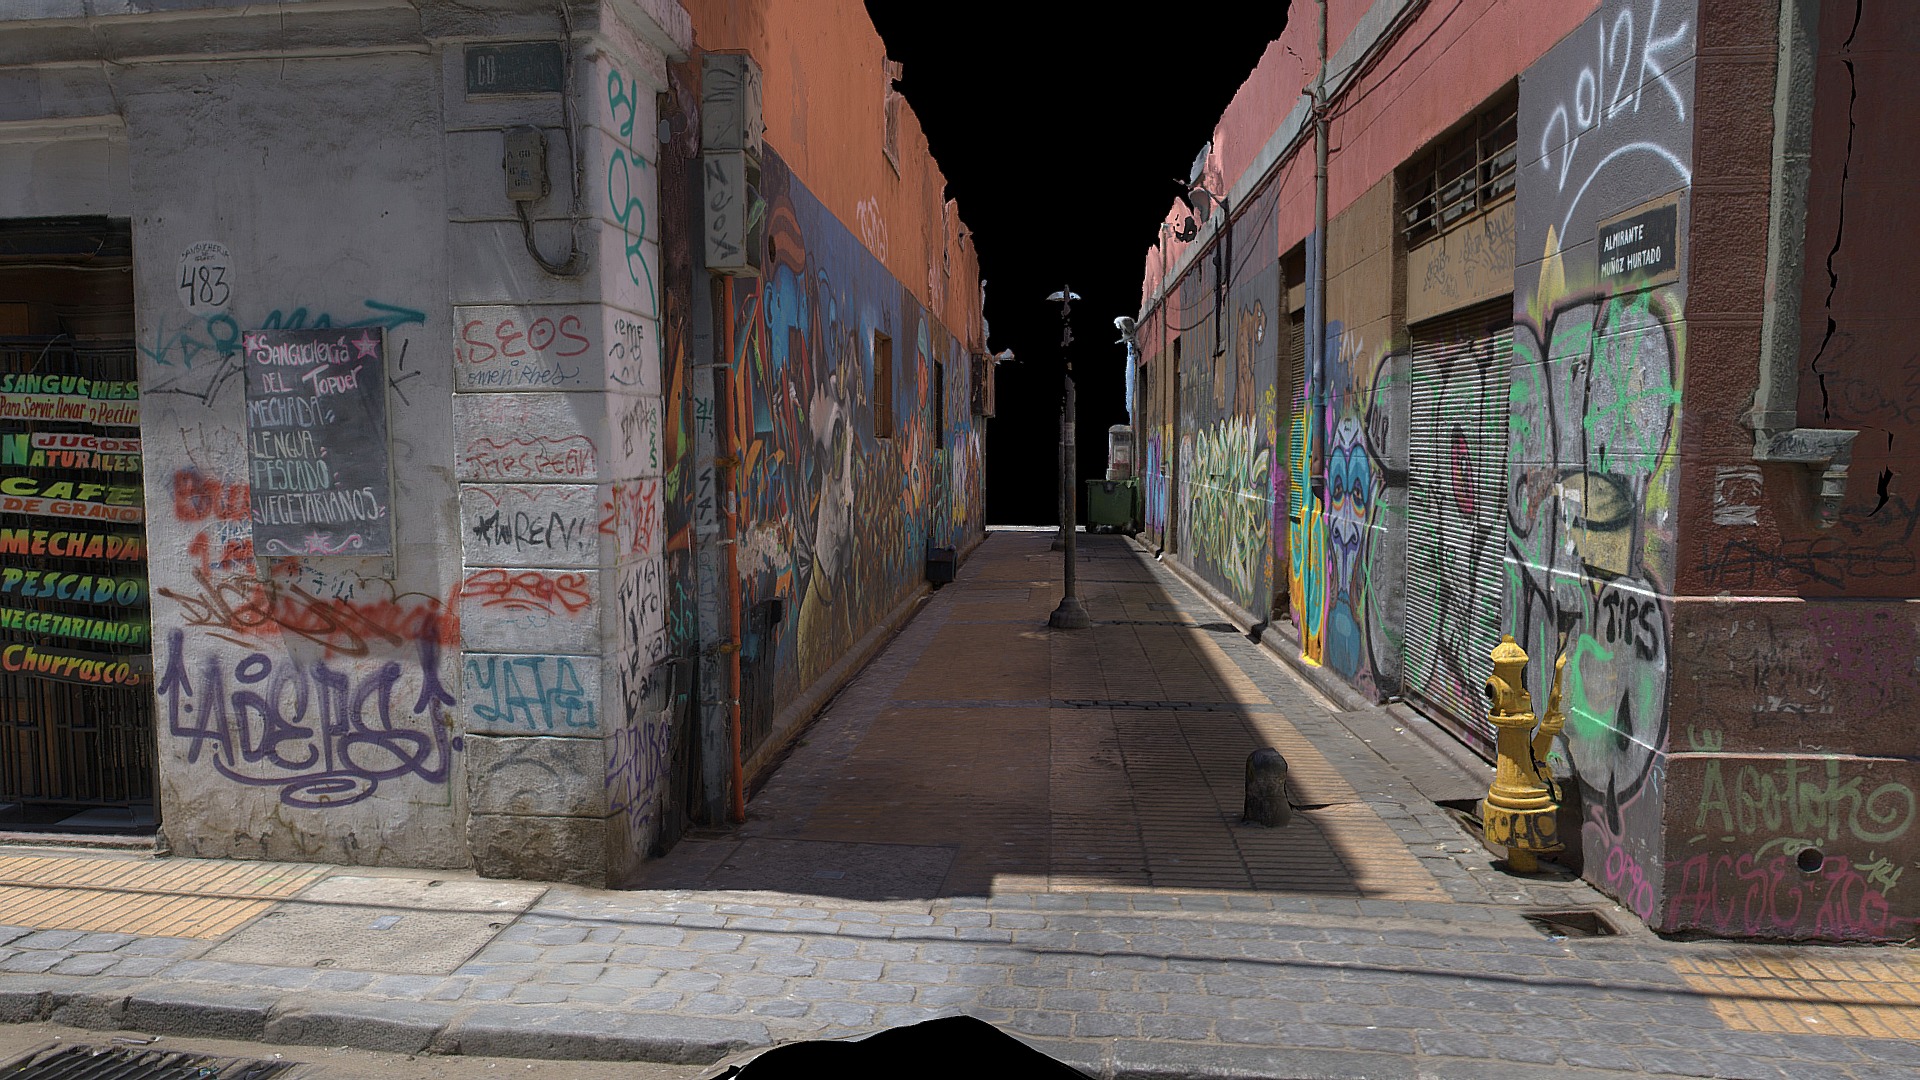 3D model 2017-11 – Valparaiso – Muro 2 - This is a 3D model of the 2017-11 - Valparaiso - Muro 2. The 3D model is about a sidewalk with graffiti.